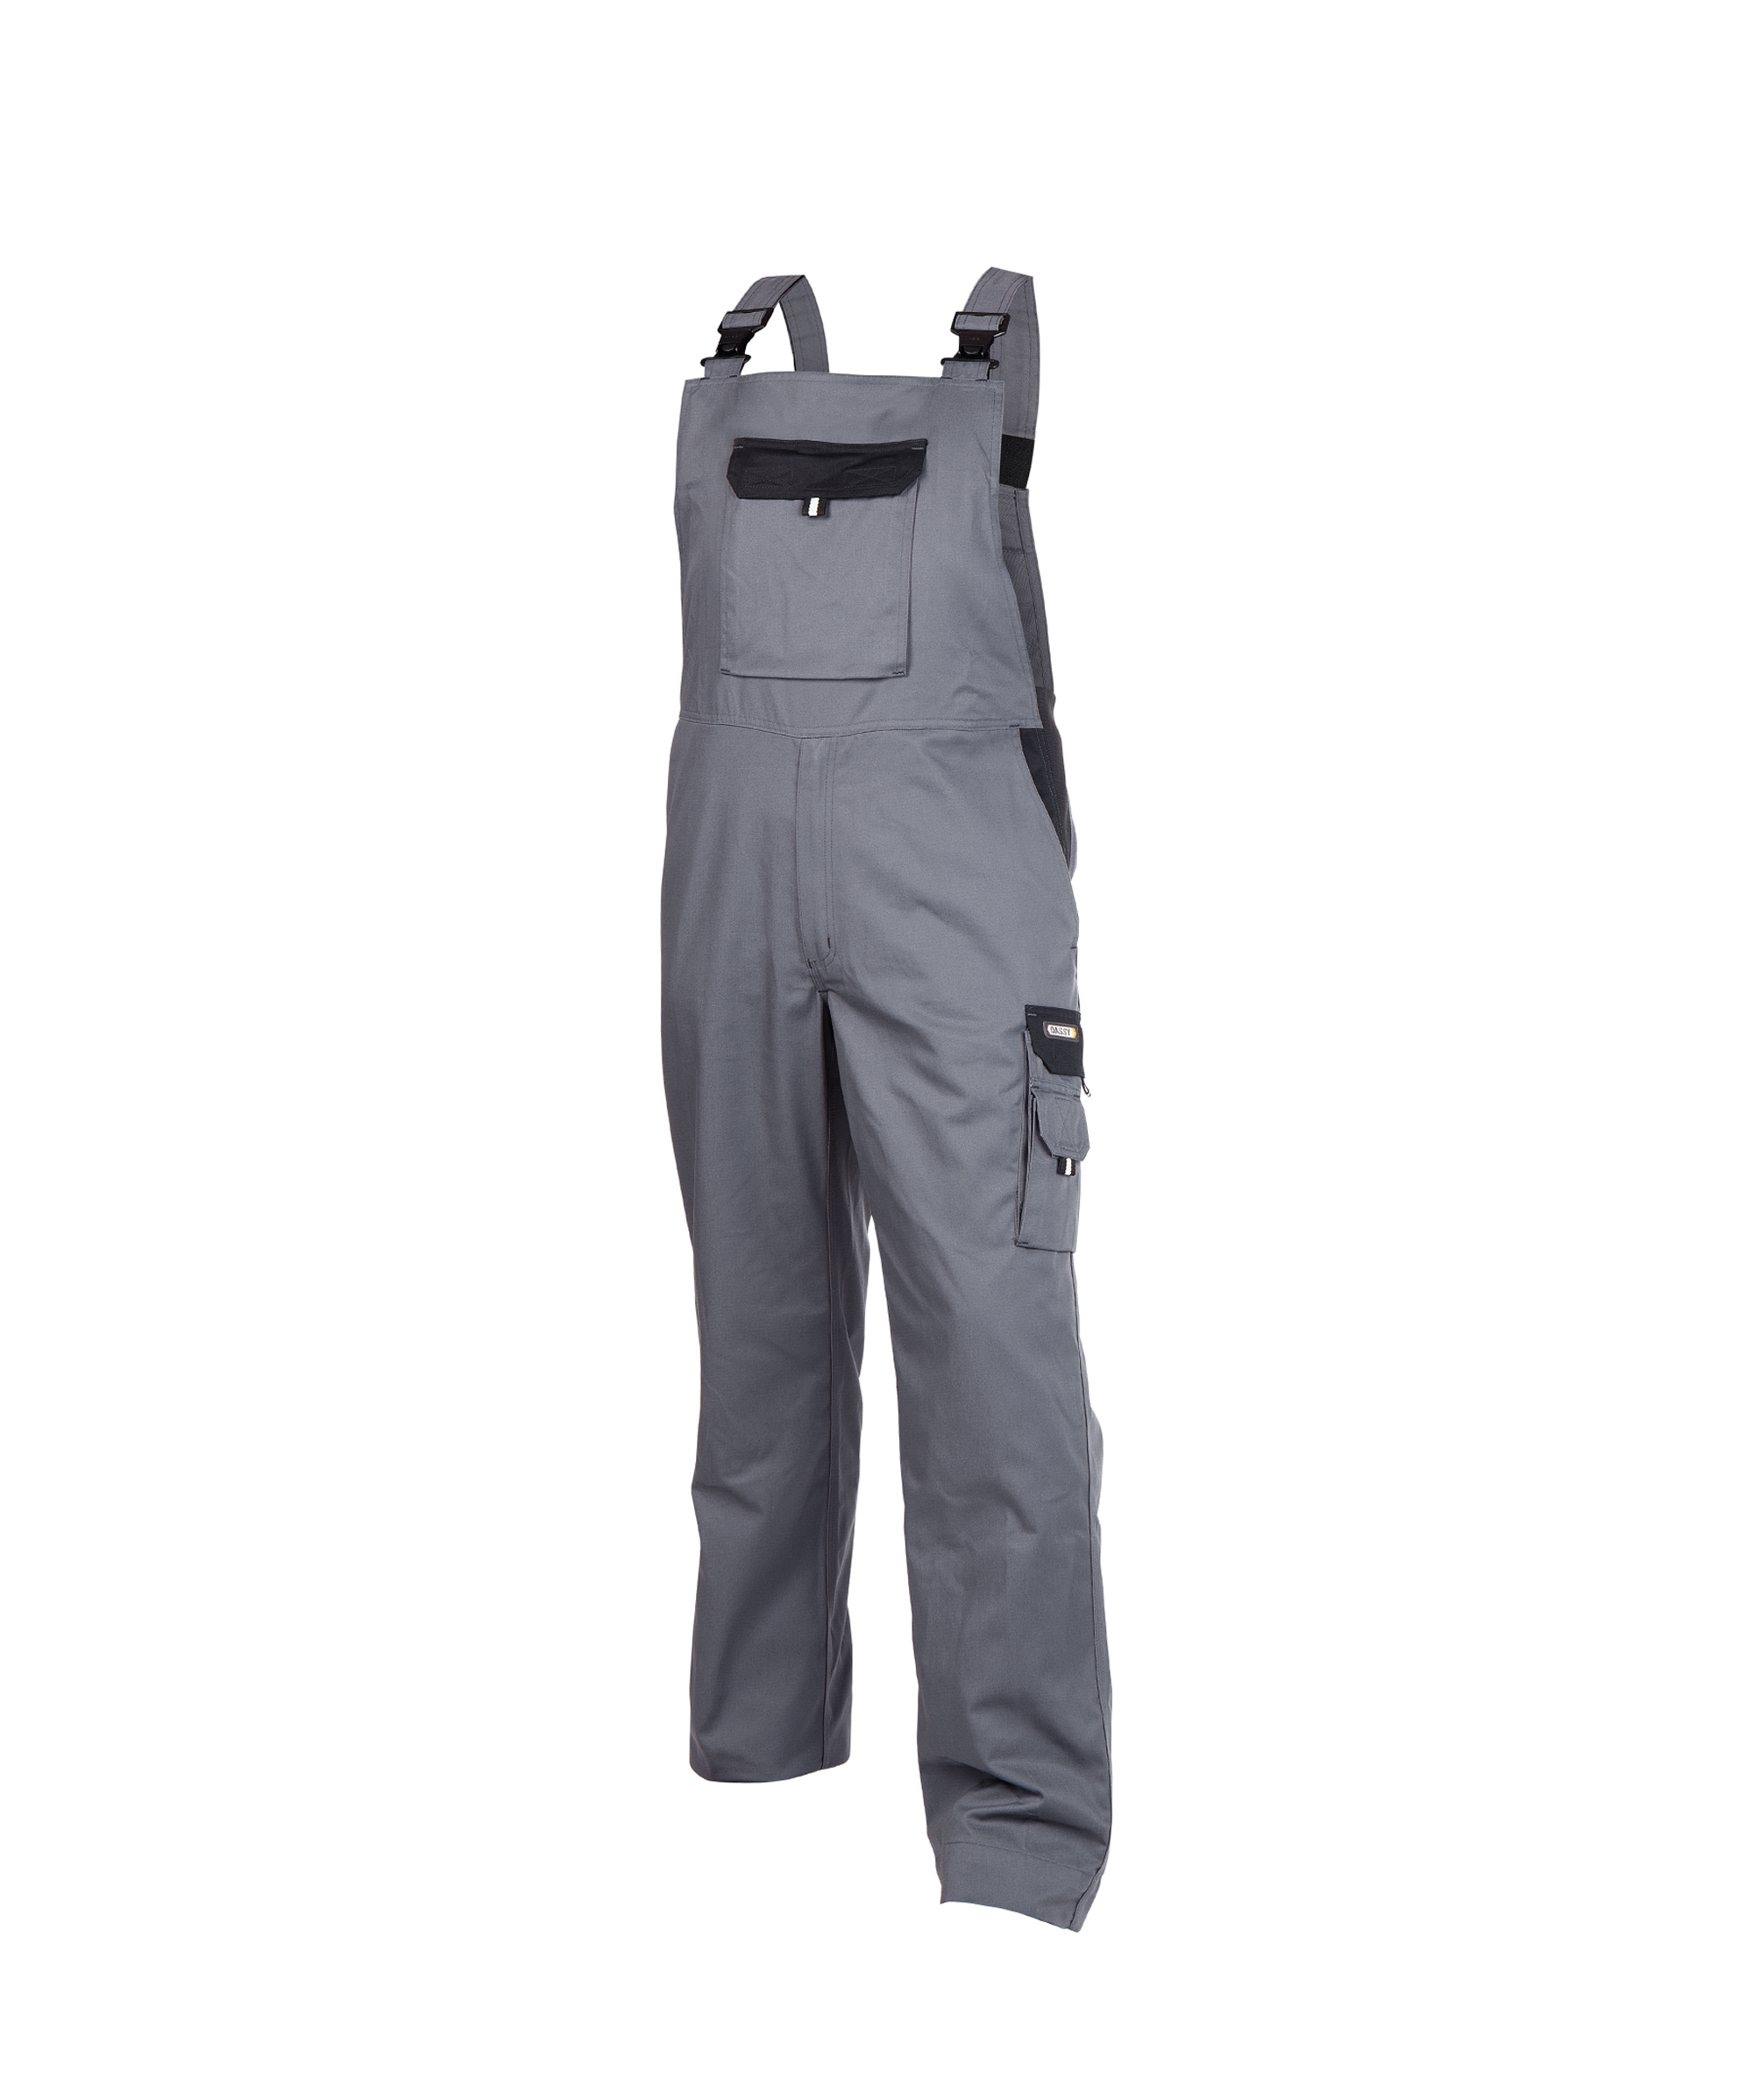 calais_two-tone-brace-overall_cement-grey-black_front.jpg